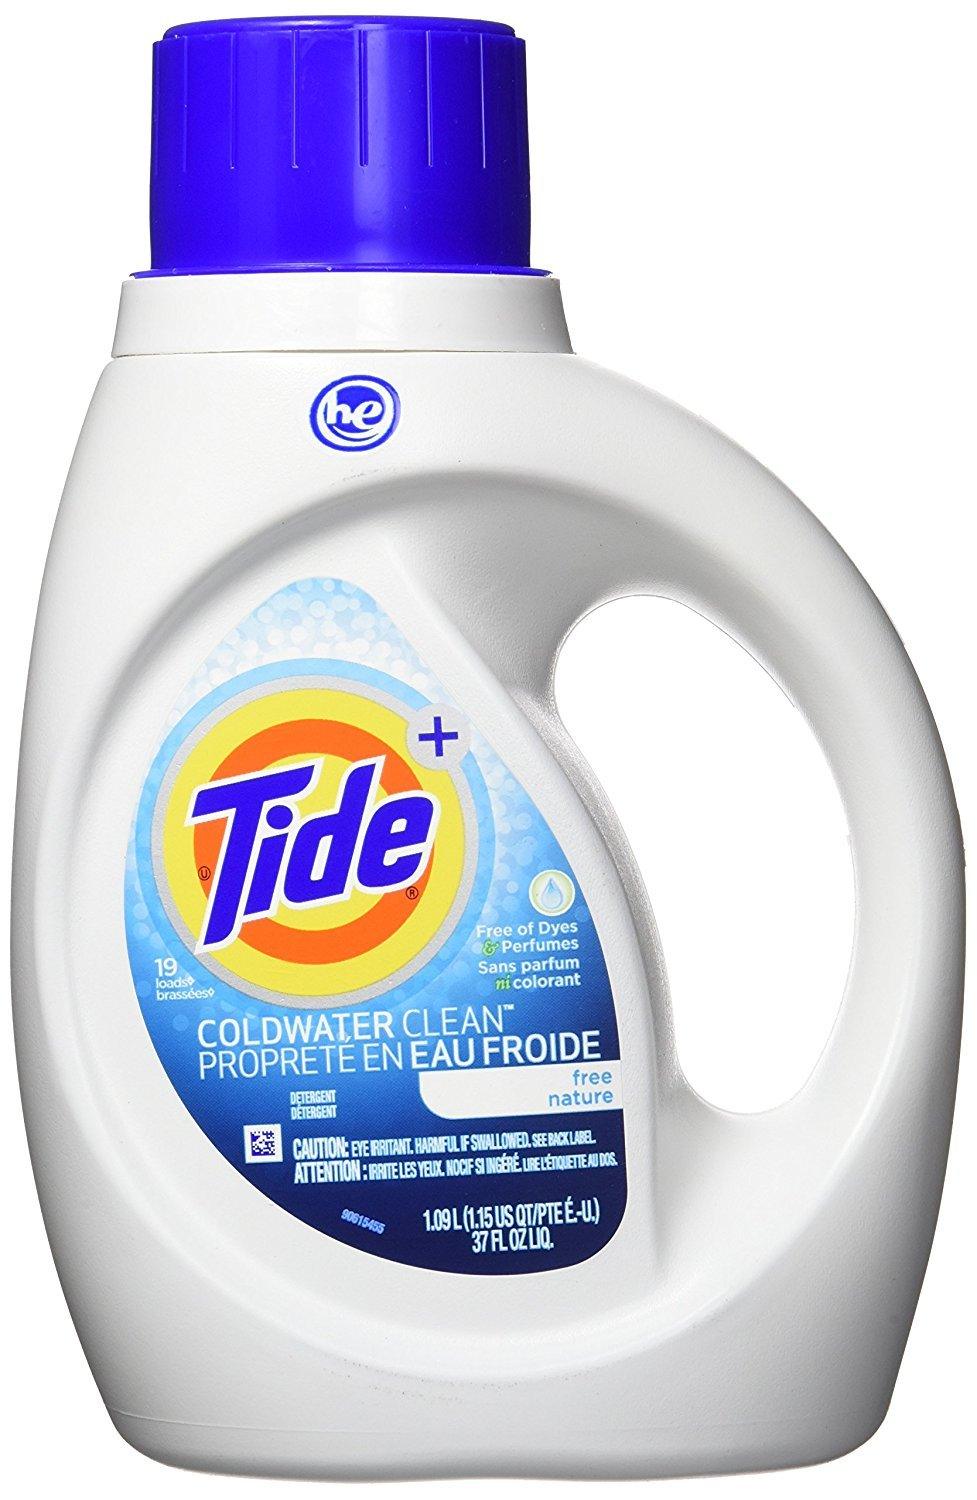 Tide Cold Water Clean Detergent - Free Nature (1.36L) - Quecan